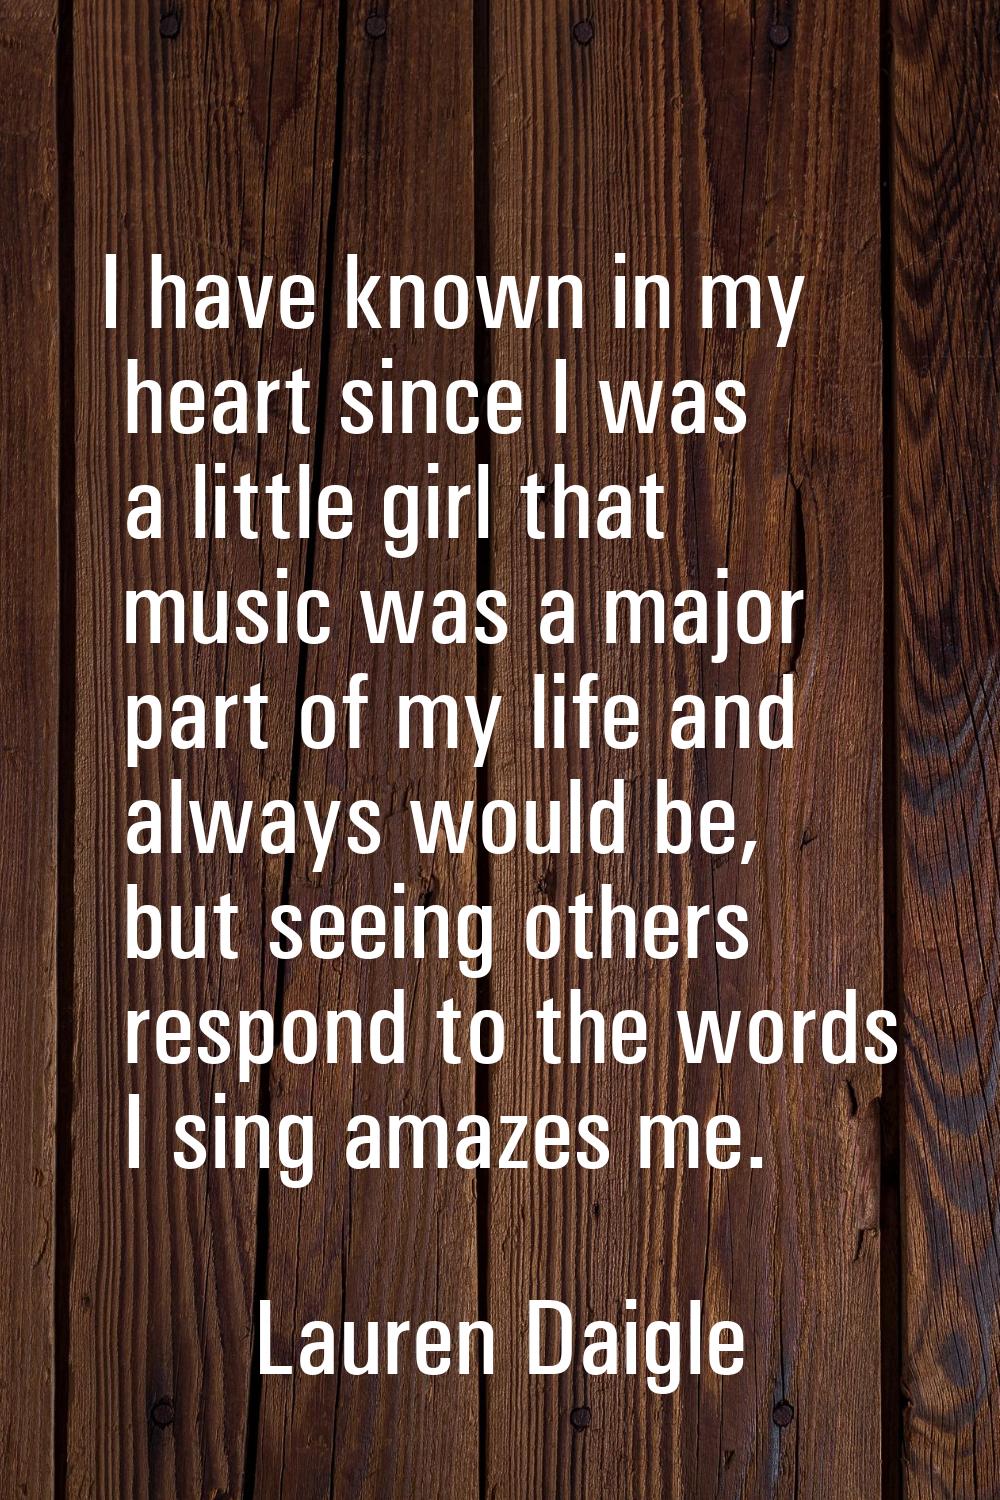 I have known in my heart since I was a little girl that music was a major part of my life and alway